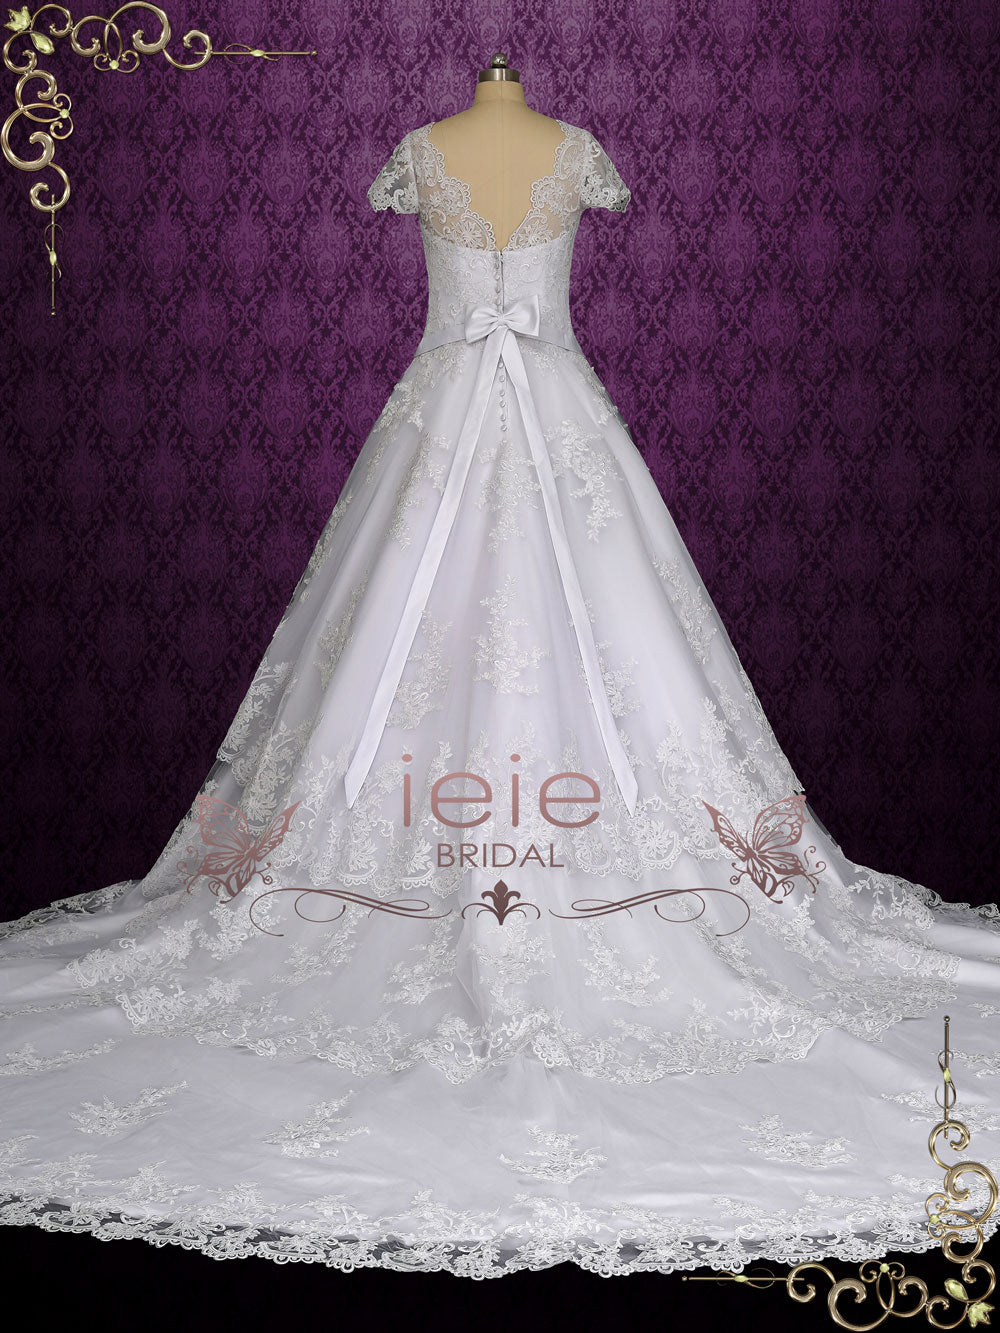 These Wedding Dresses Are Your Fairytale Dreams Come True – ieie